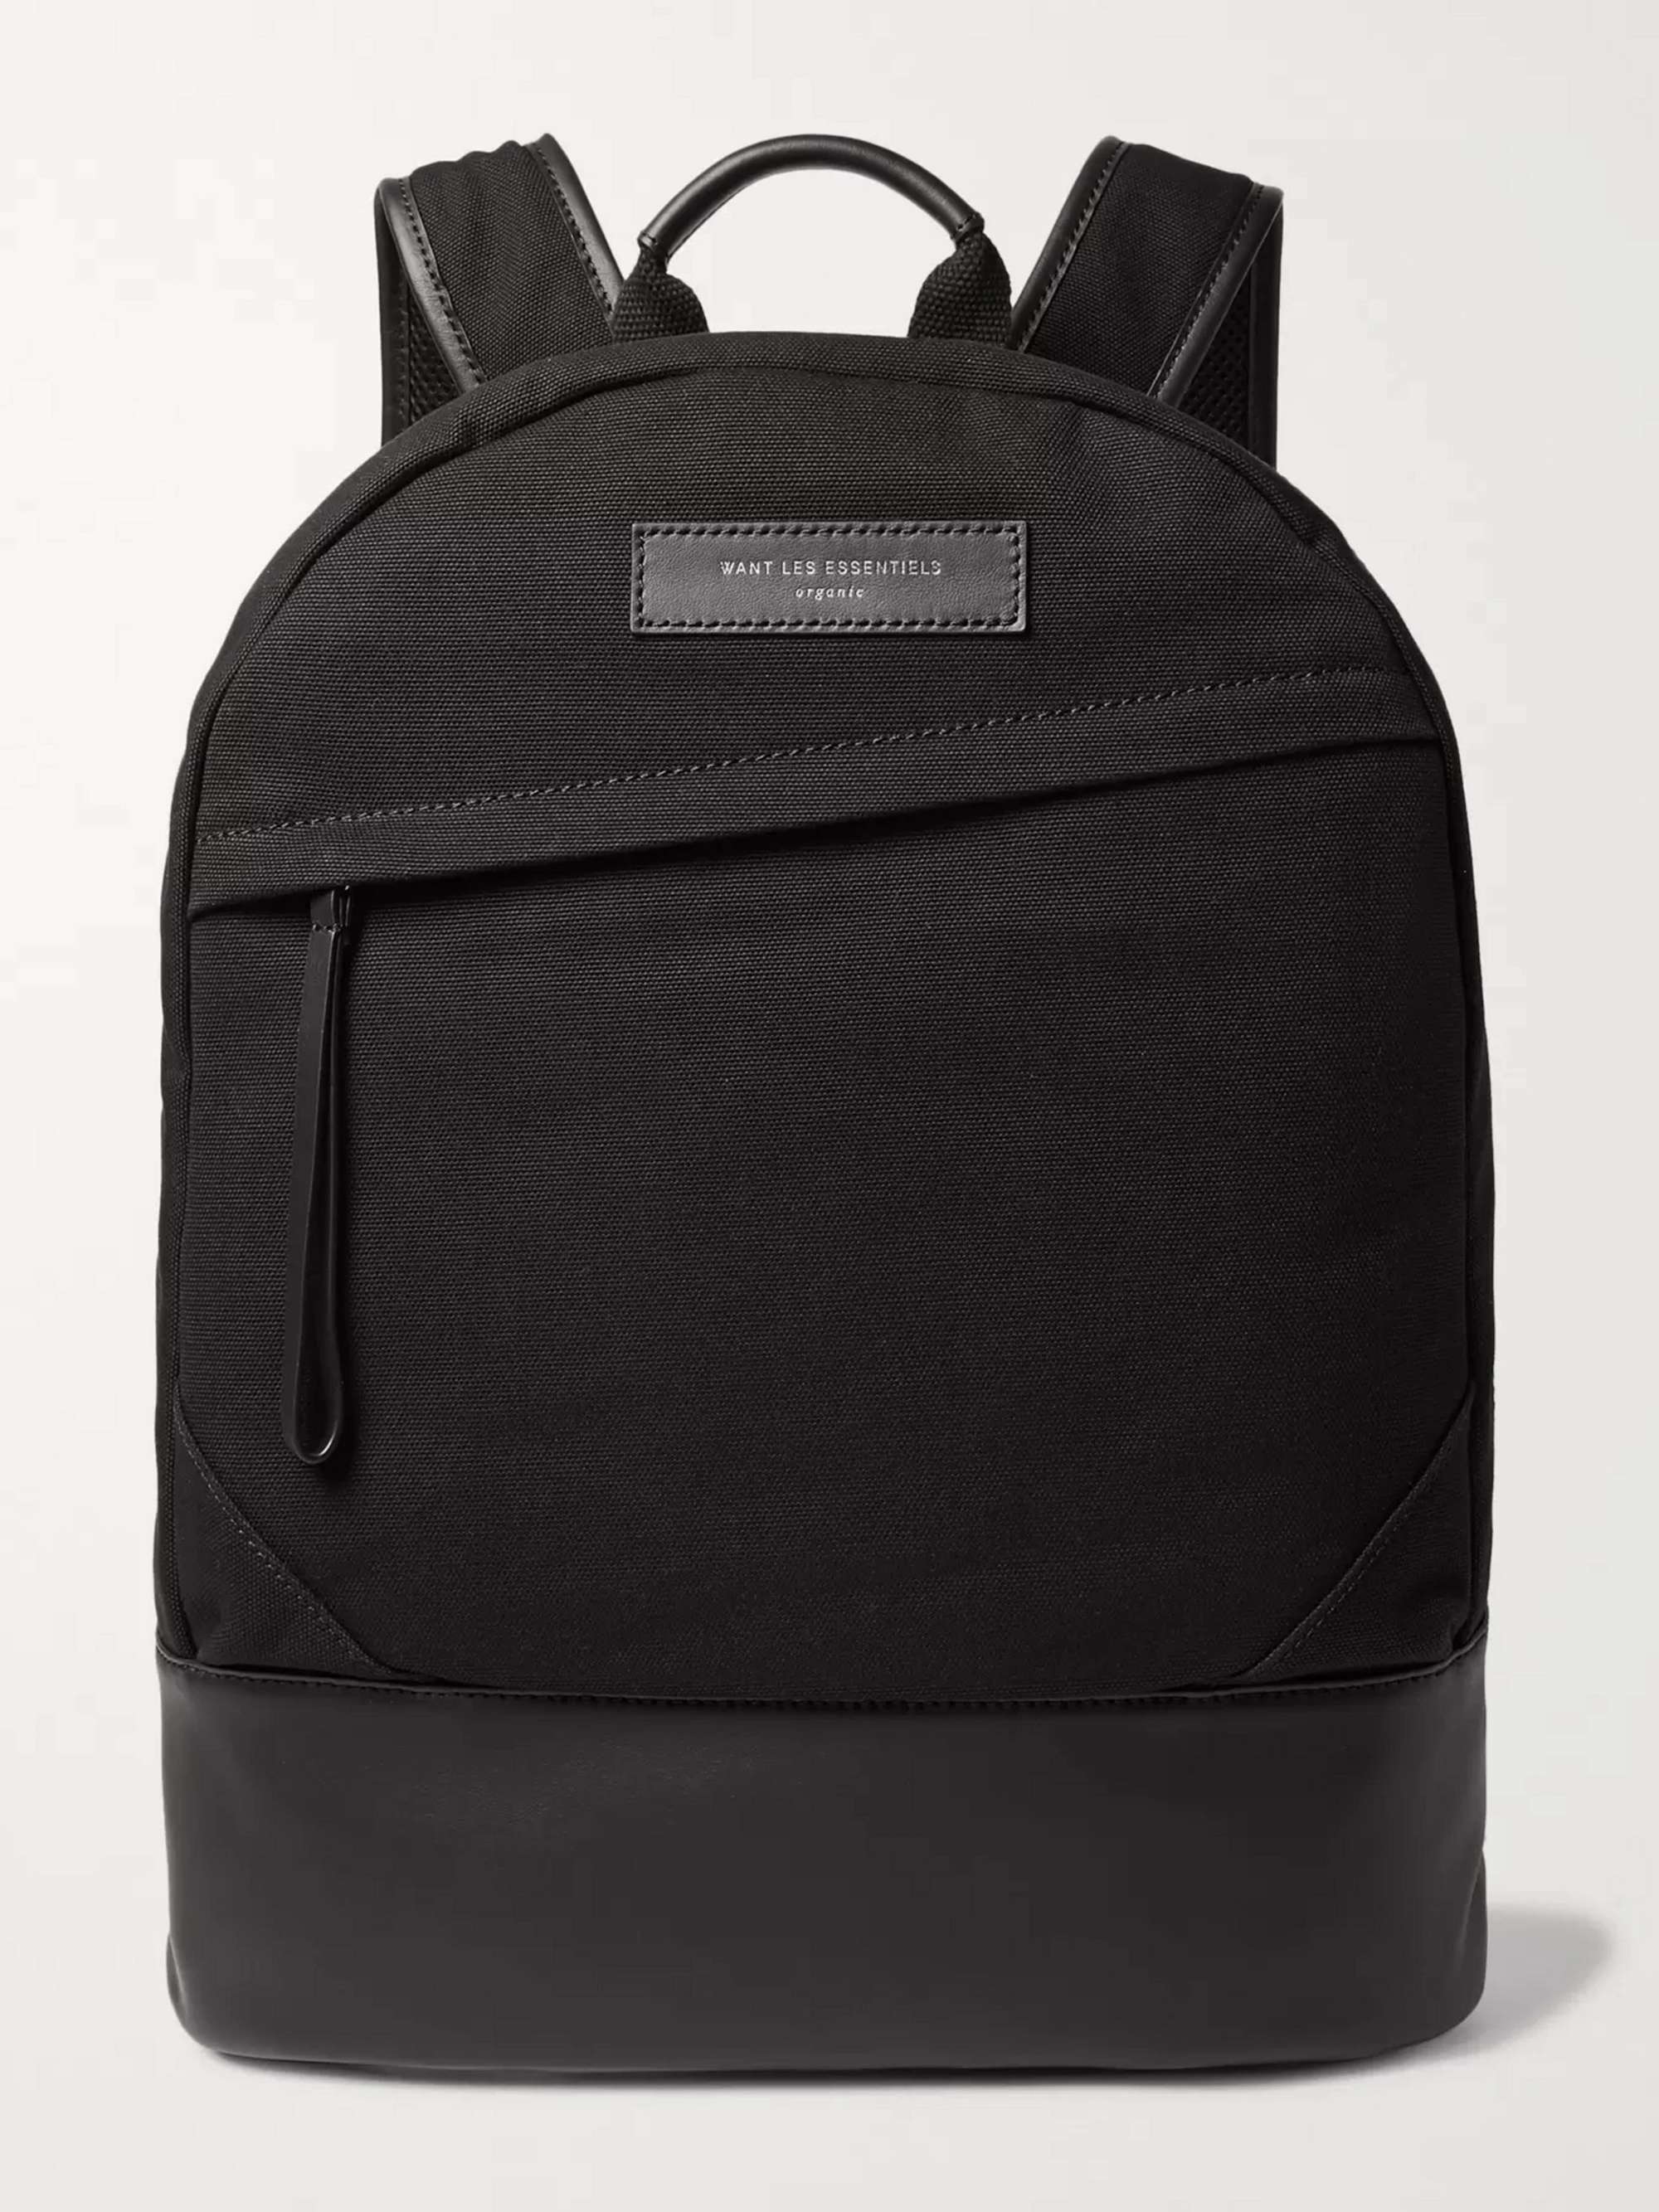 WANT LES ESSENTIELS Kastrup Leather-Trimmed Organic Cotton-Canvas Backpack